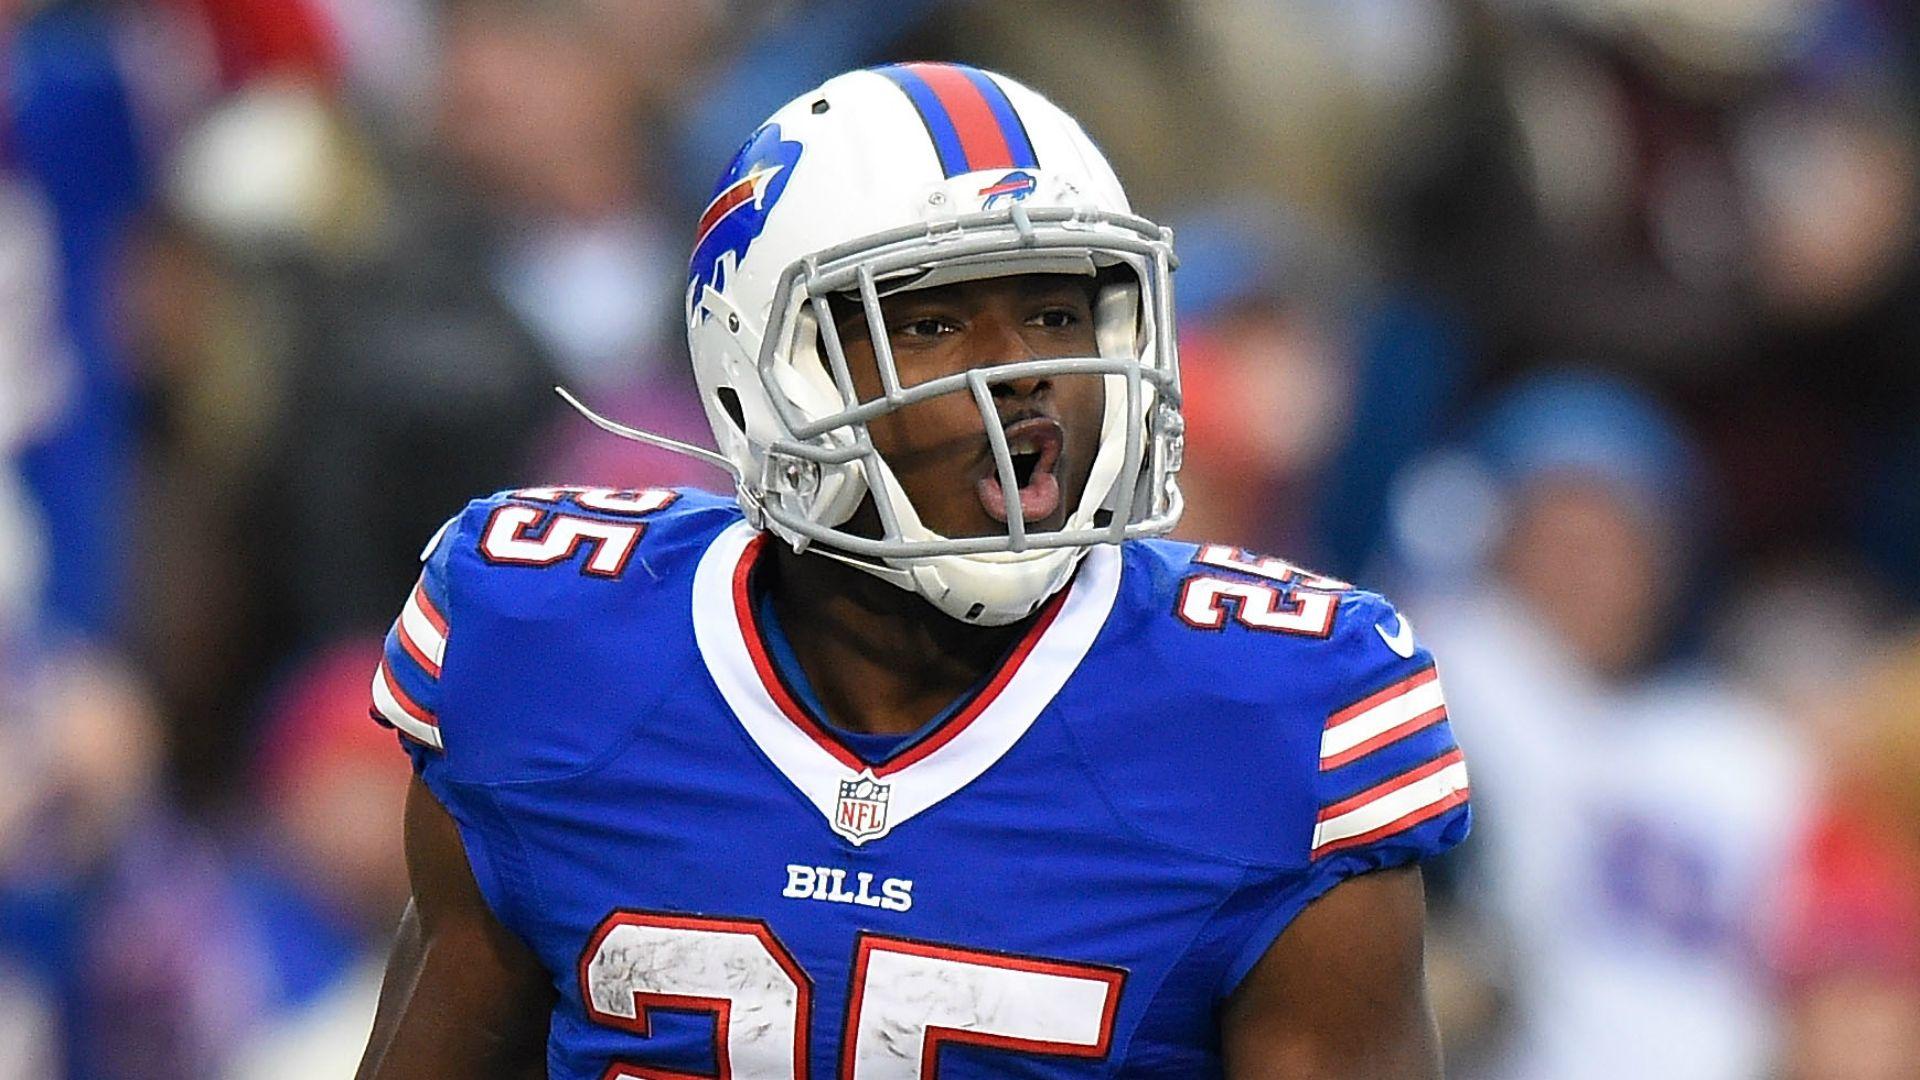 LeSean McCoy Injury Update: Bills RB Day To Day With Ankle Sprain